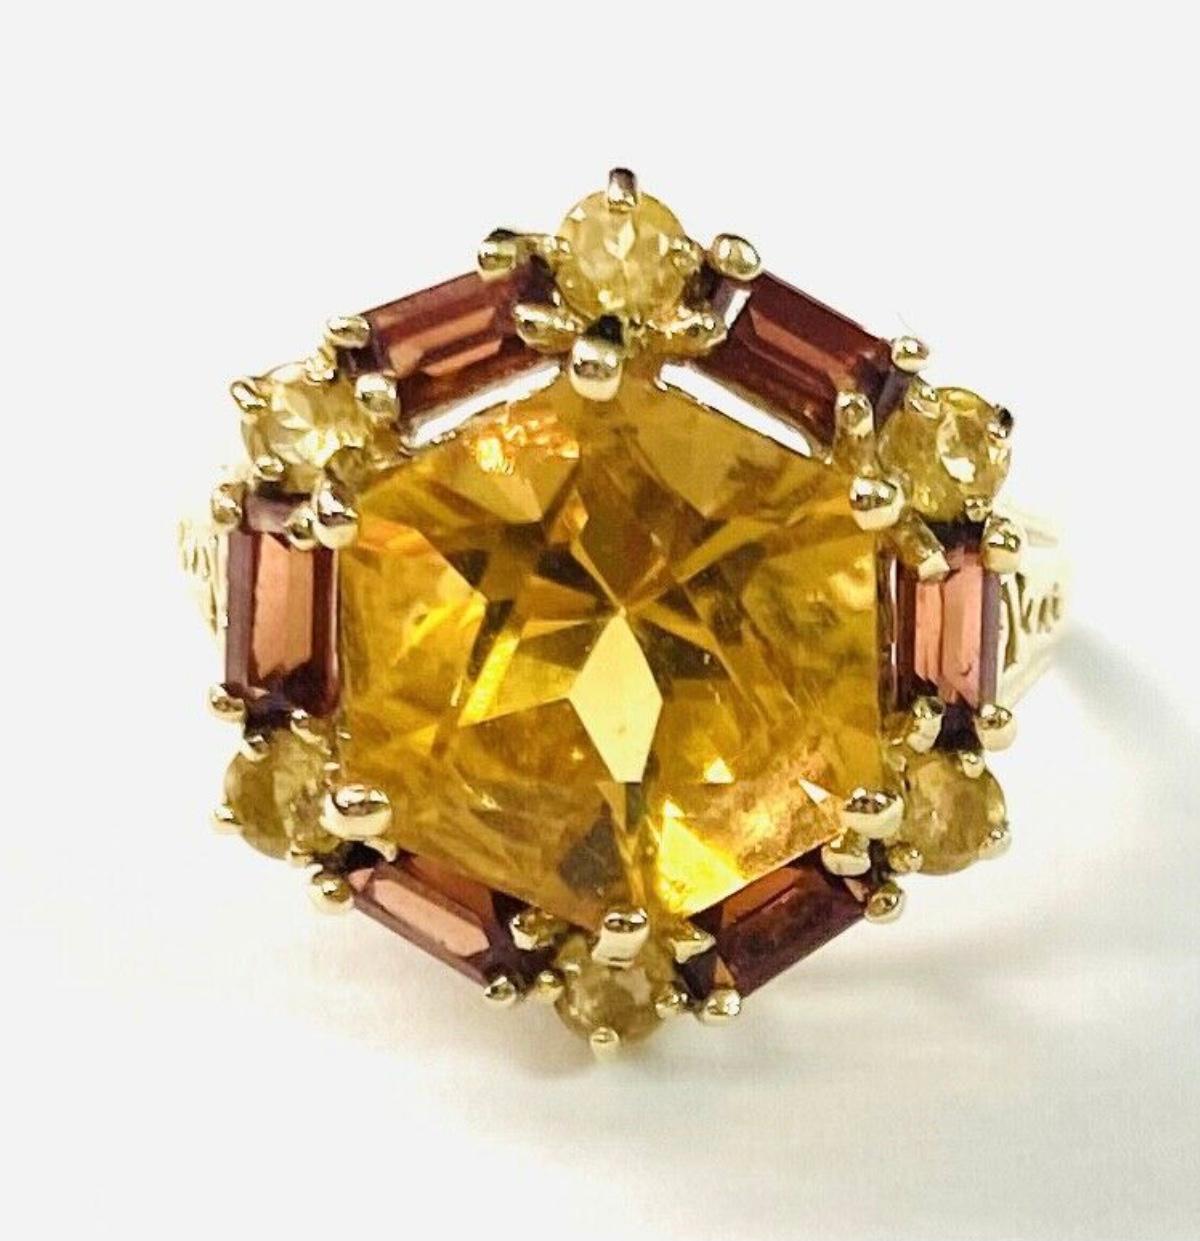 10k Citrine ring with baguettes, 4.14 Grams TW. The dimension of the round citrine is approximately 11mm. Approximately 7 carats. Marked 10k. Approximate size 6.5.
